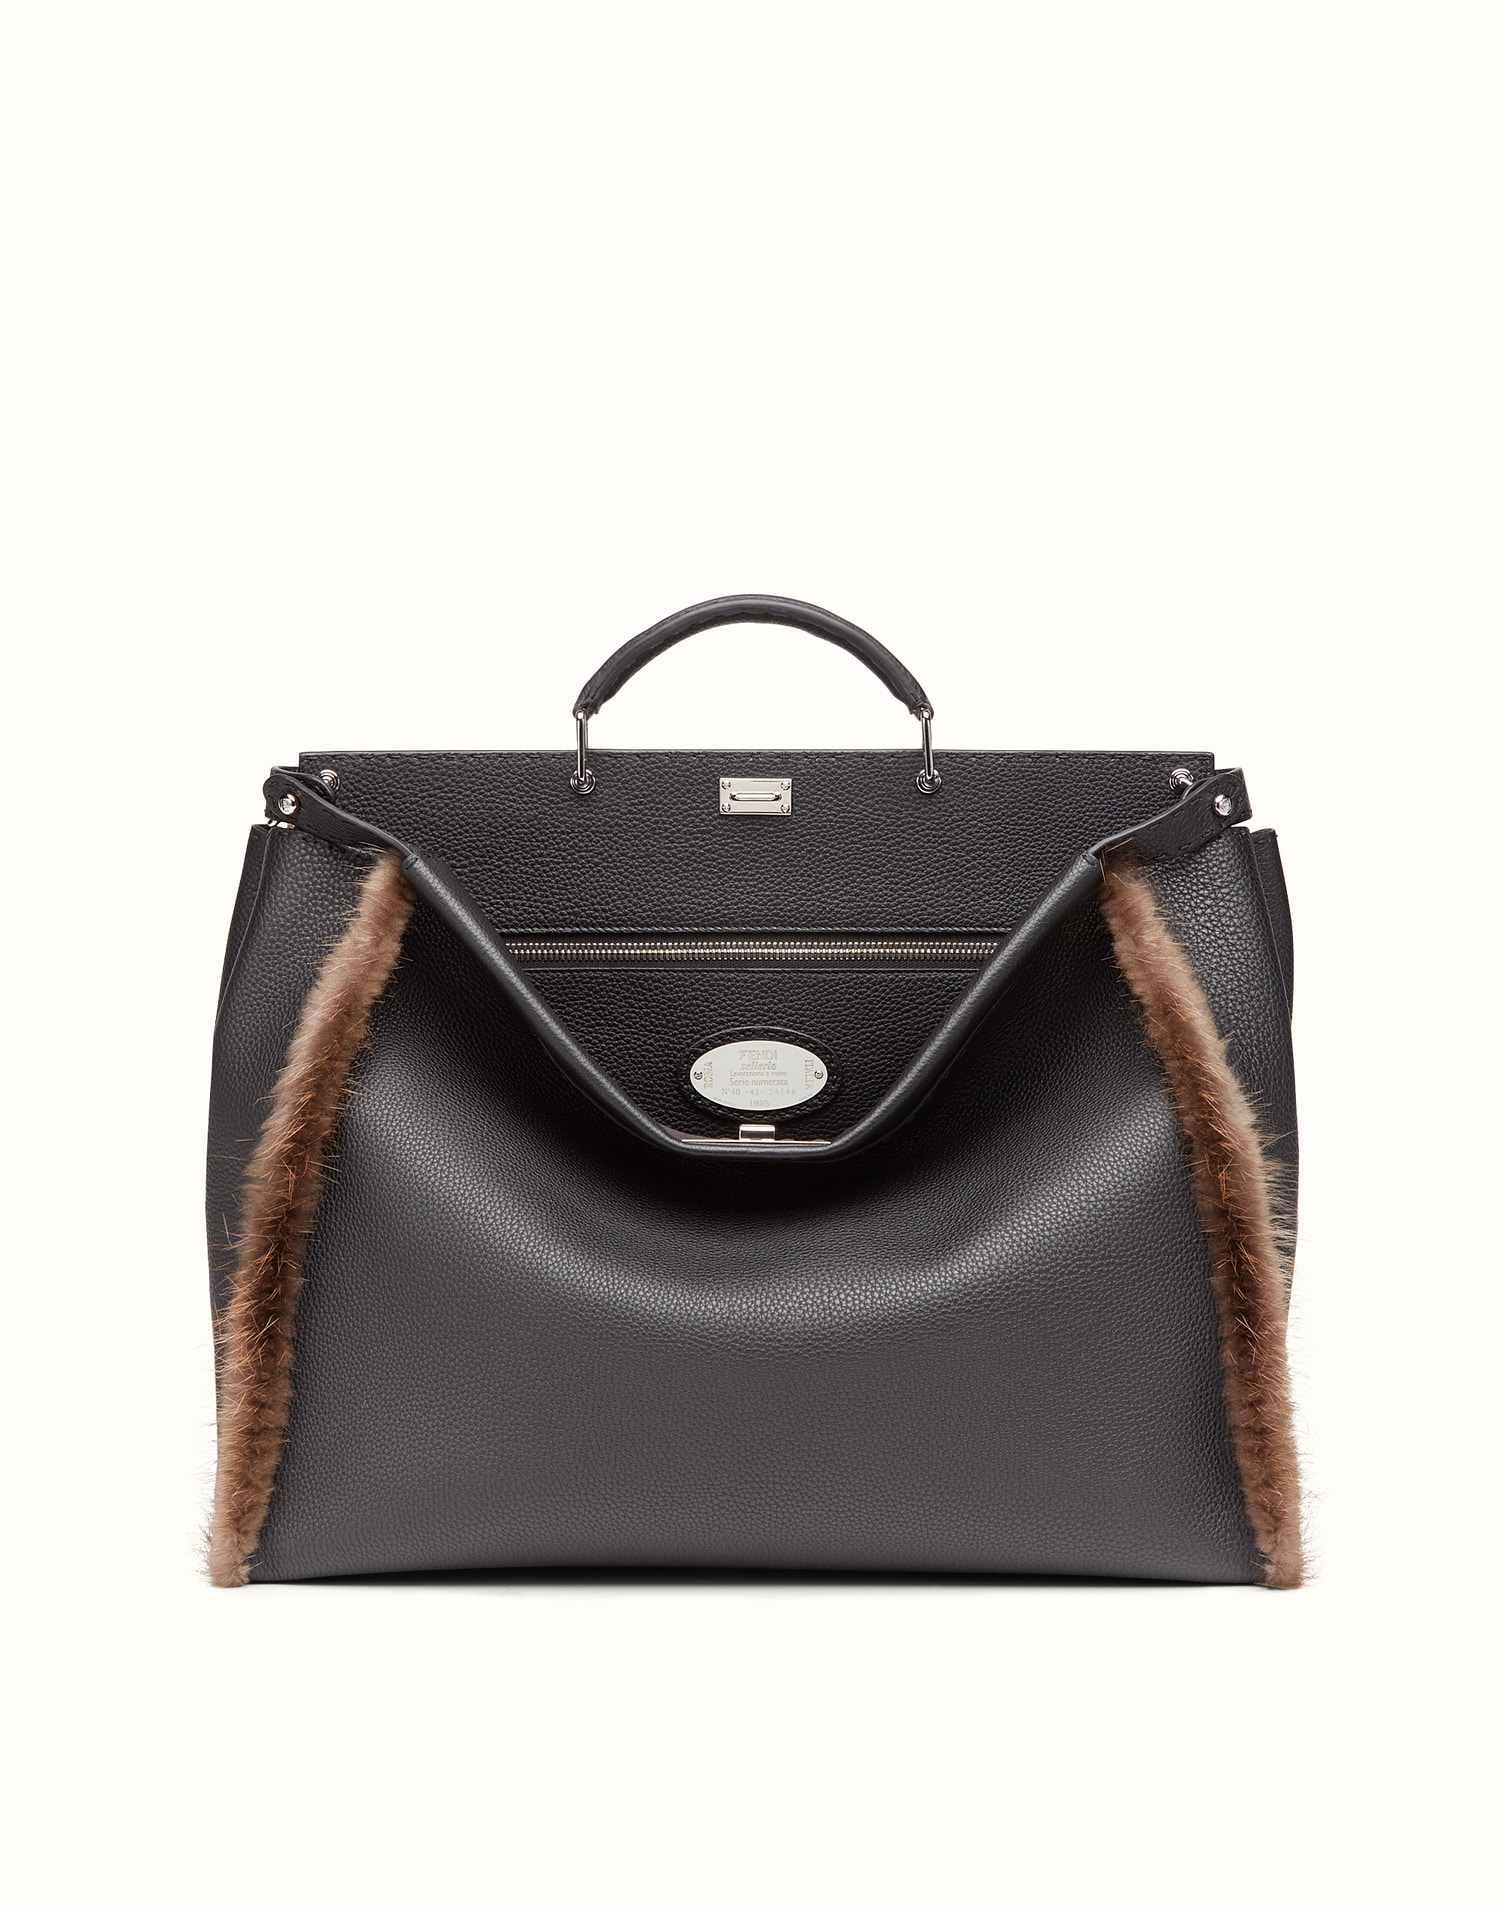 Fendi Fur Trimmed Bags For Fall 2016 | Spotted Fashion